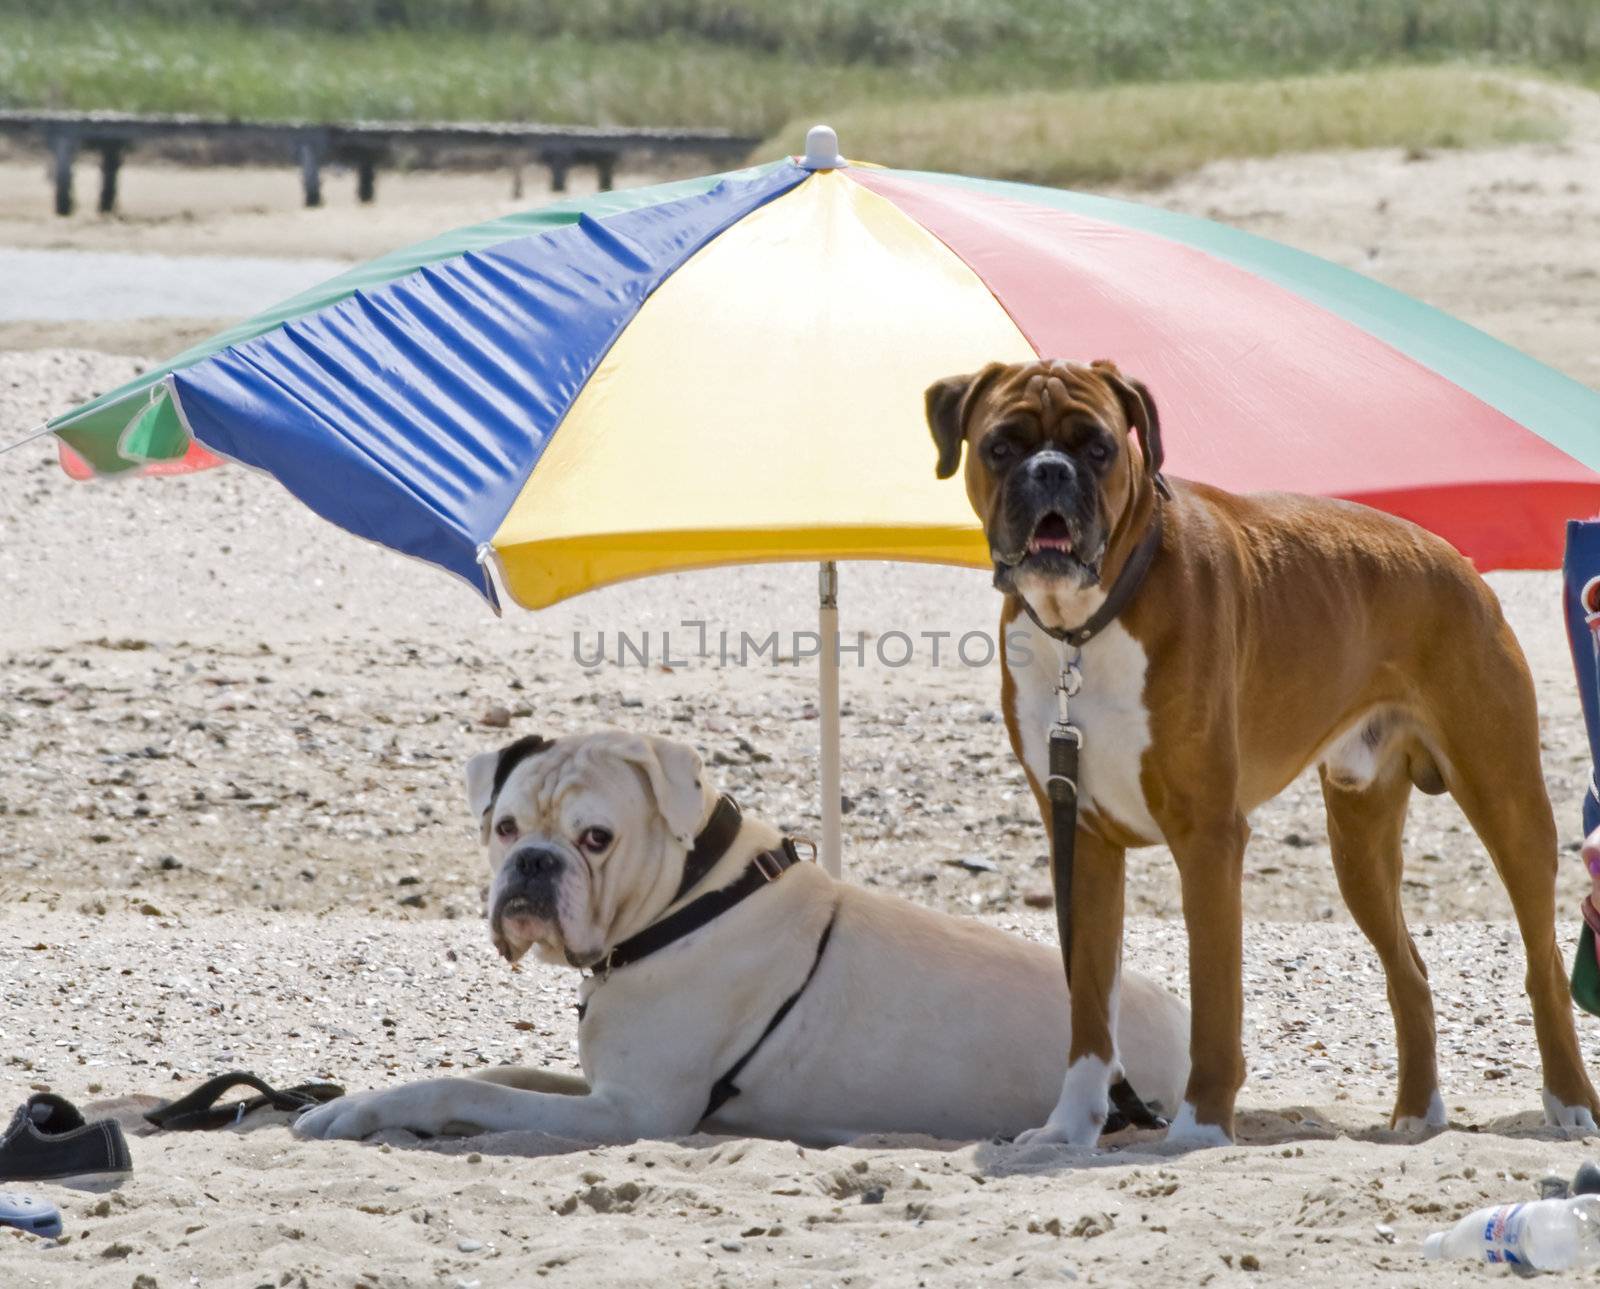 Two dogs on a holiday, relaxing on a beach